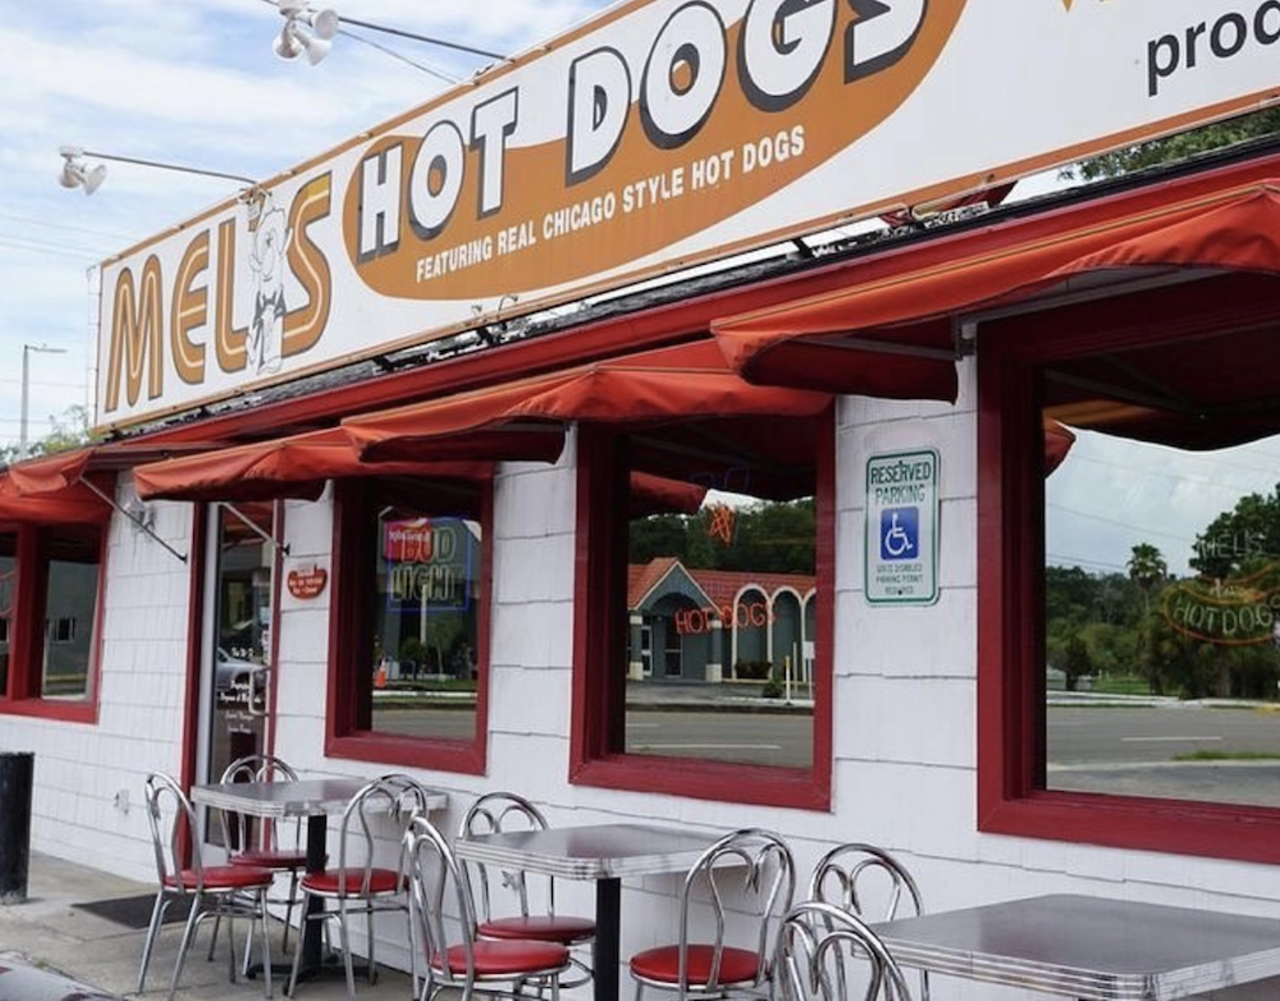 Mel’s Hot Dogs
4136 E Busch Blvd., Tampa, 813-985-8000
For nearly 50 years, Mel’s has served the people of Tampa its signature hot dogs for an affordable price. Mel’s special and Chicago-style dogs cost $5.25, cheese and chili dogs set you back $5.95, slaw dogs run $6.25 and bagel dogs are $7.70, not to mention the fries, baked beans and onion rings.
Photo via Mel’s Hot Dogs/Facebook